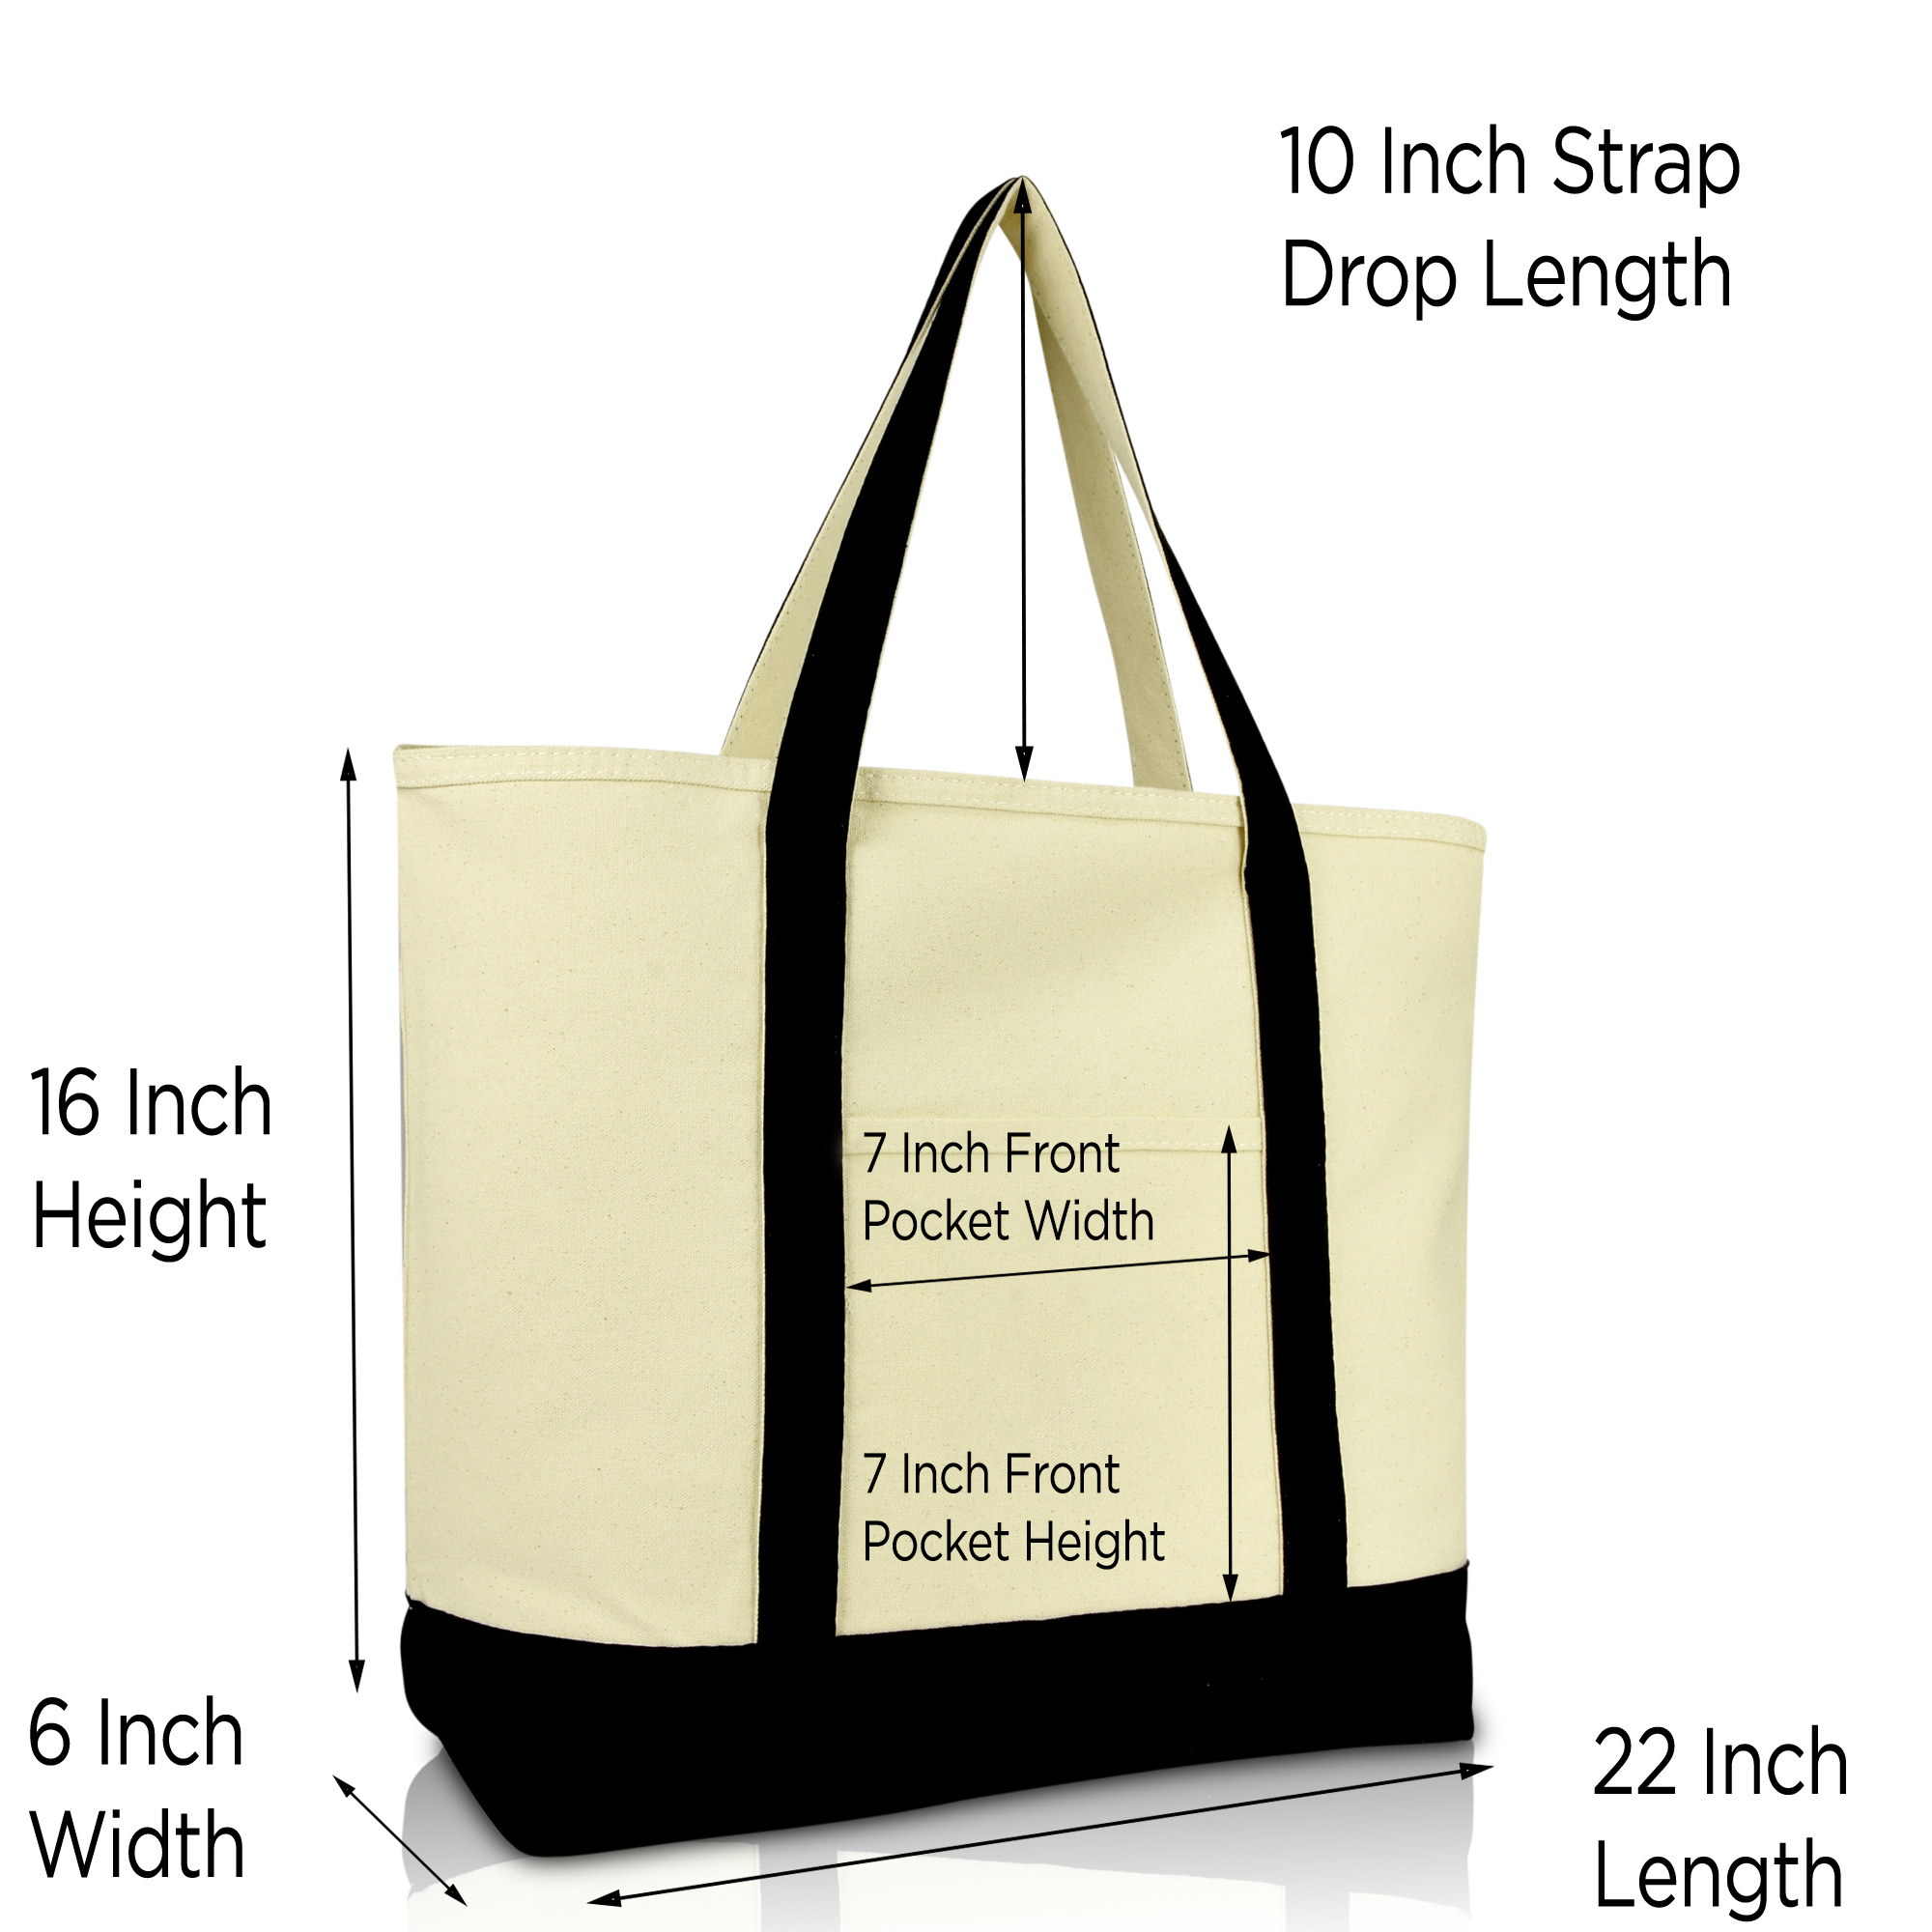 DALIX 22" Extra Large Cotton Canvas Zippered Shopping Tote Grocery Bag in Black Female - image 2 of 6